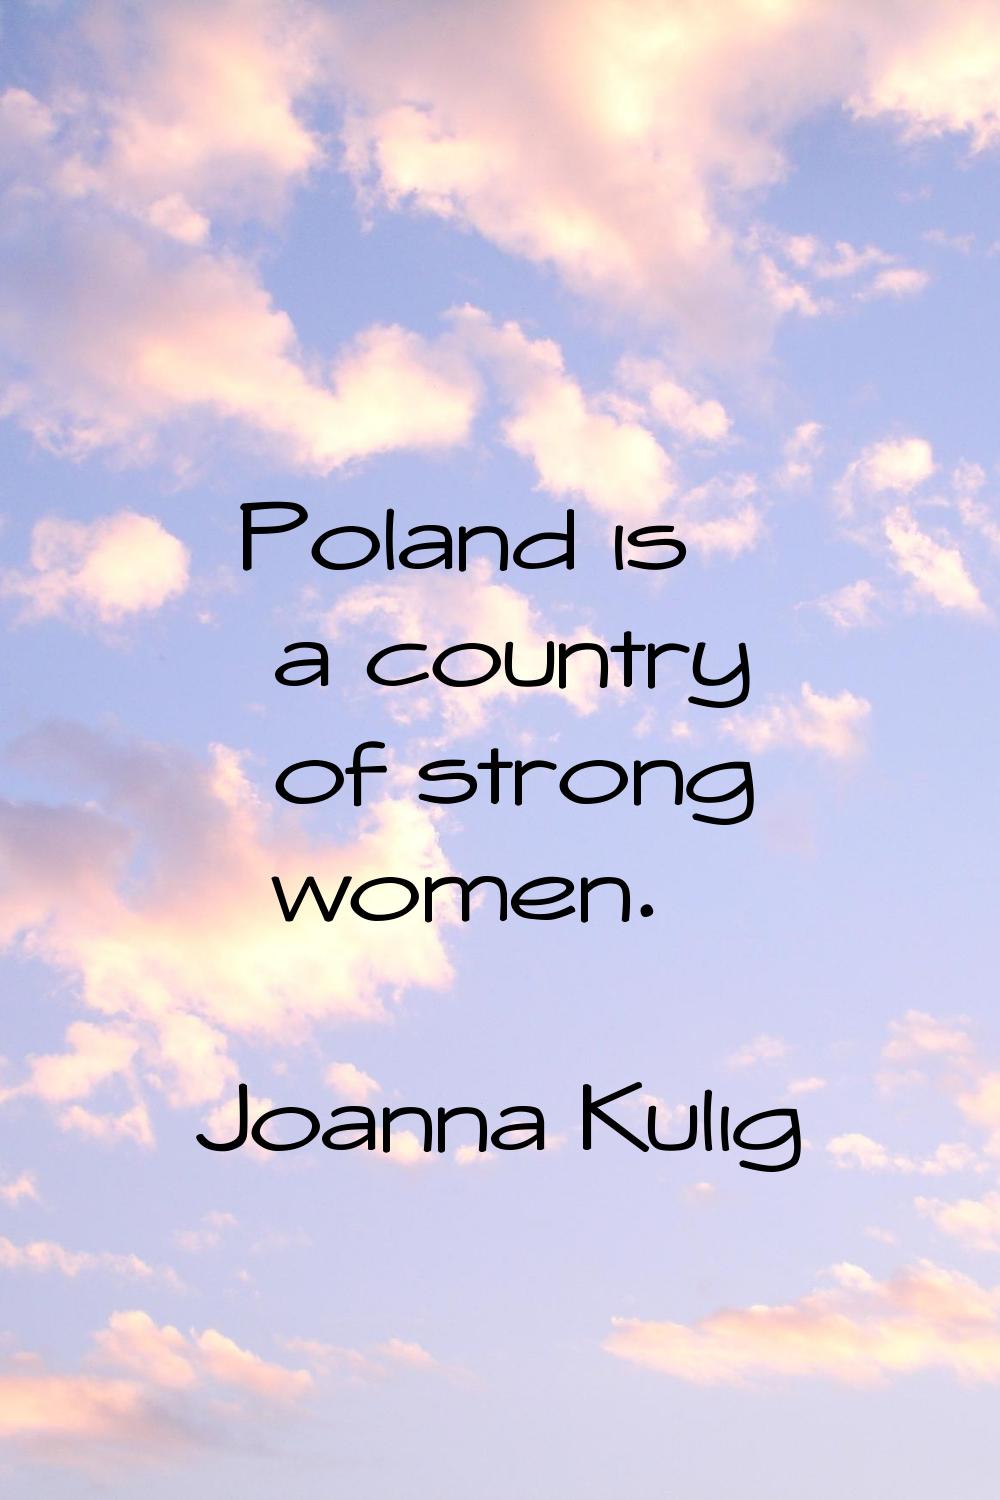 Poland is a country of strong women.